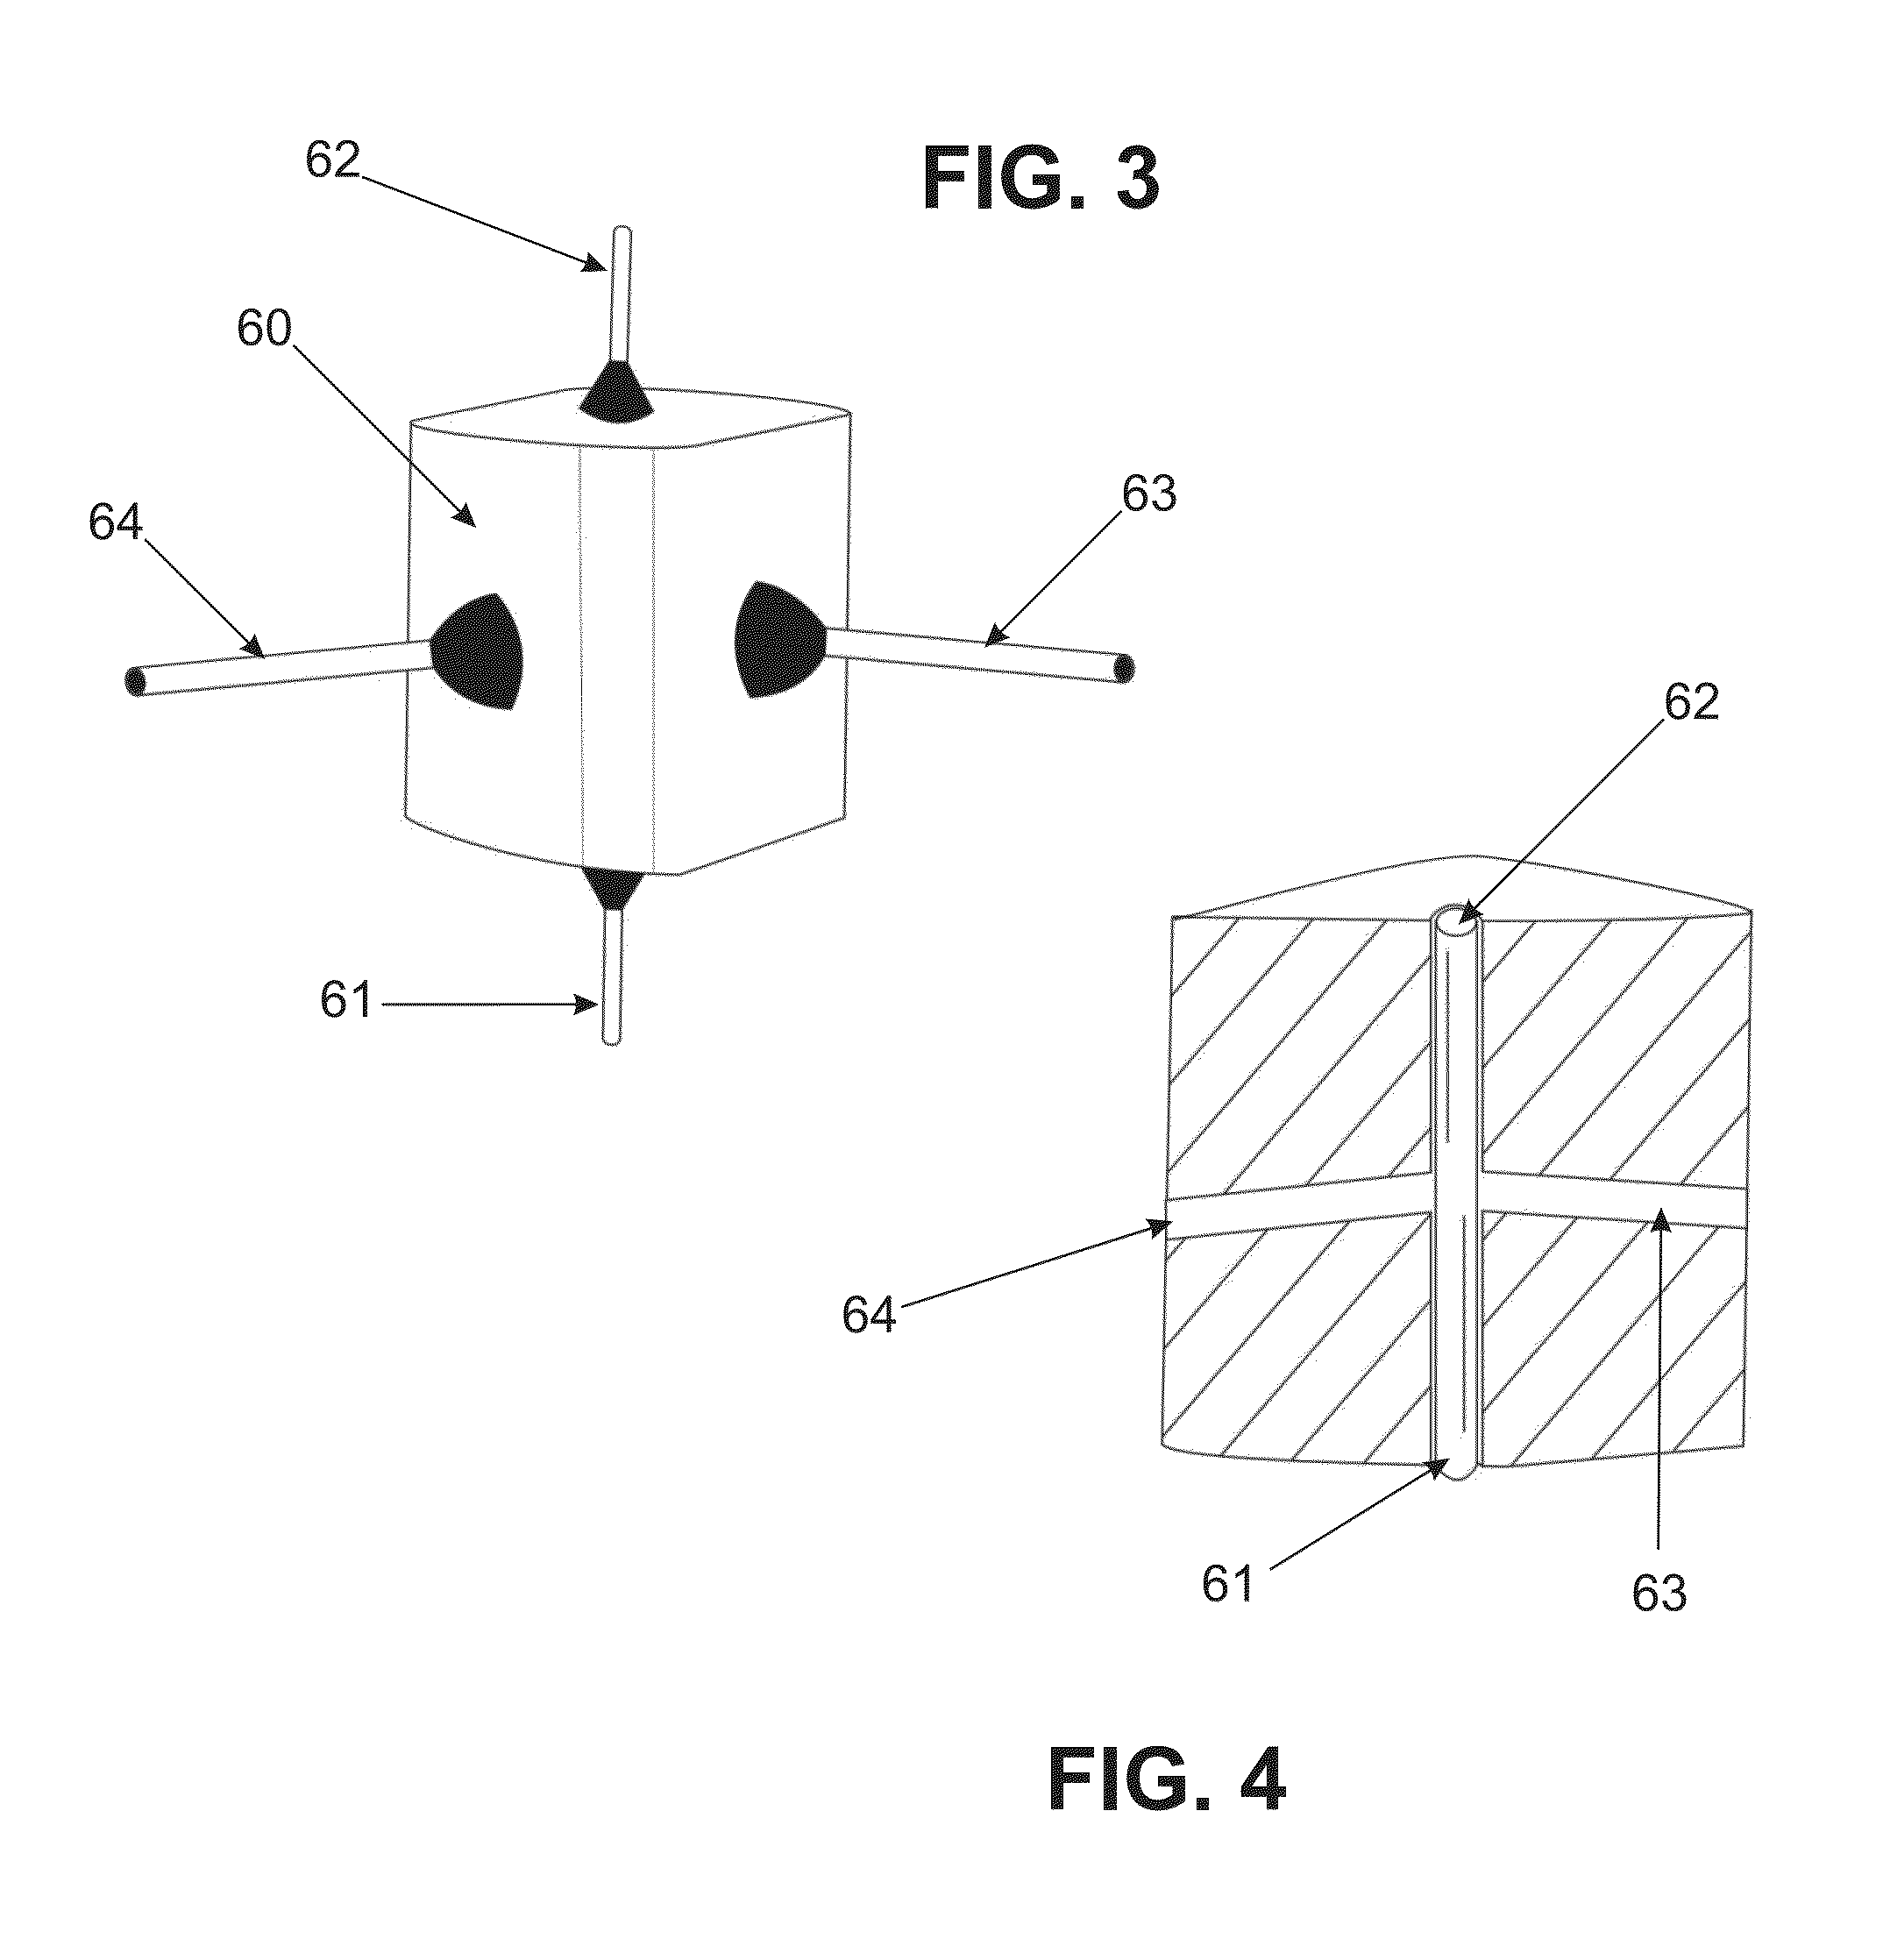 Device for online measurement of neurotransmitters using enzymatic reactors